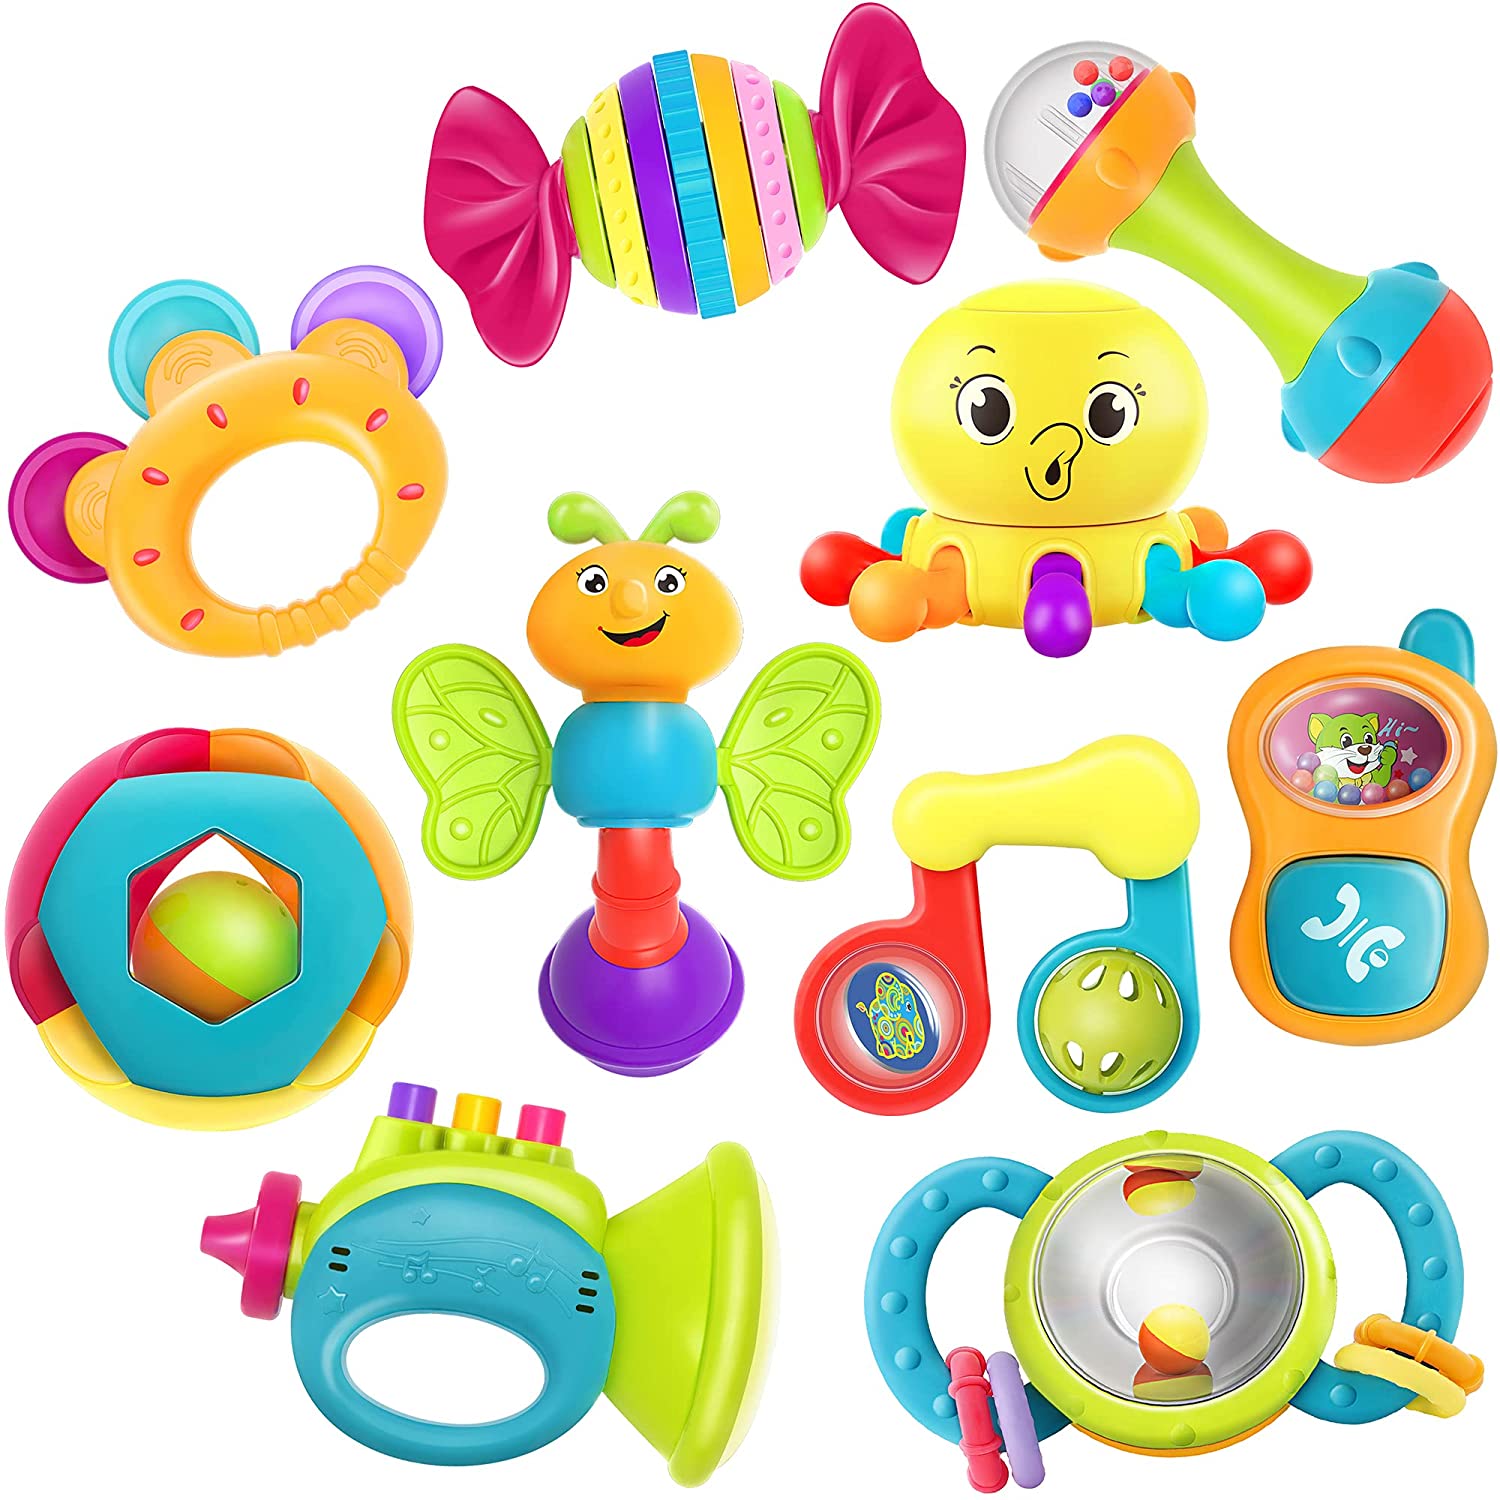 Imported Educational Toys for Baby | Baby Learning Toys |